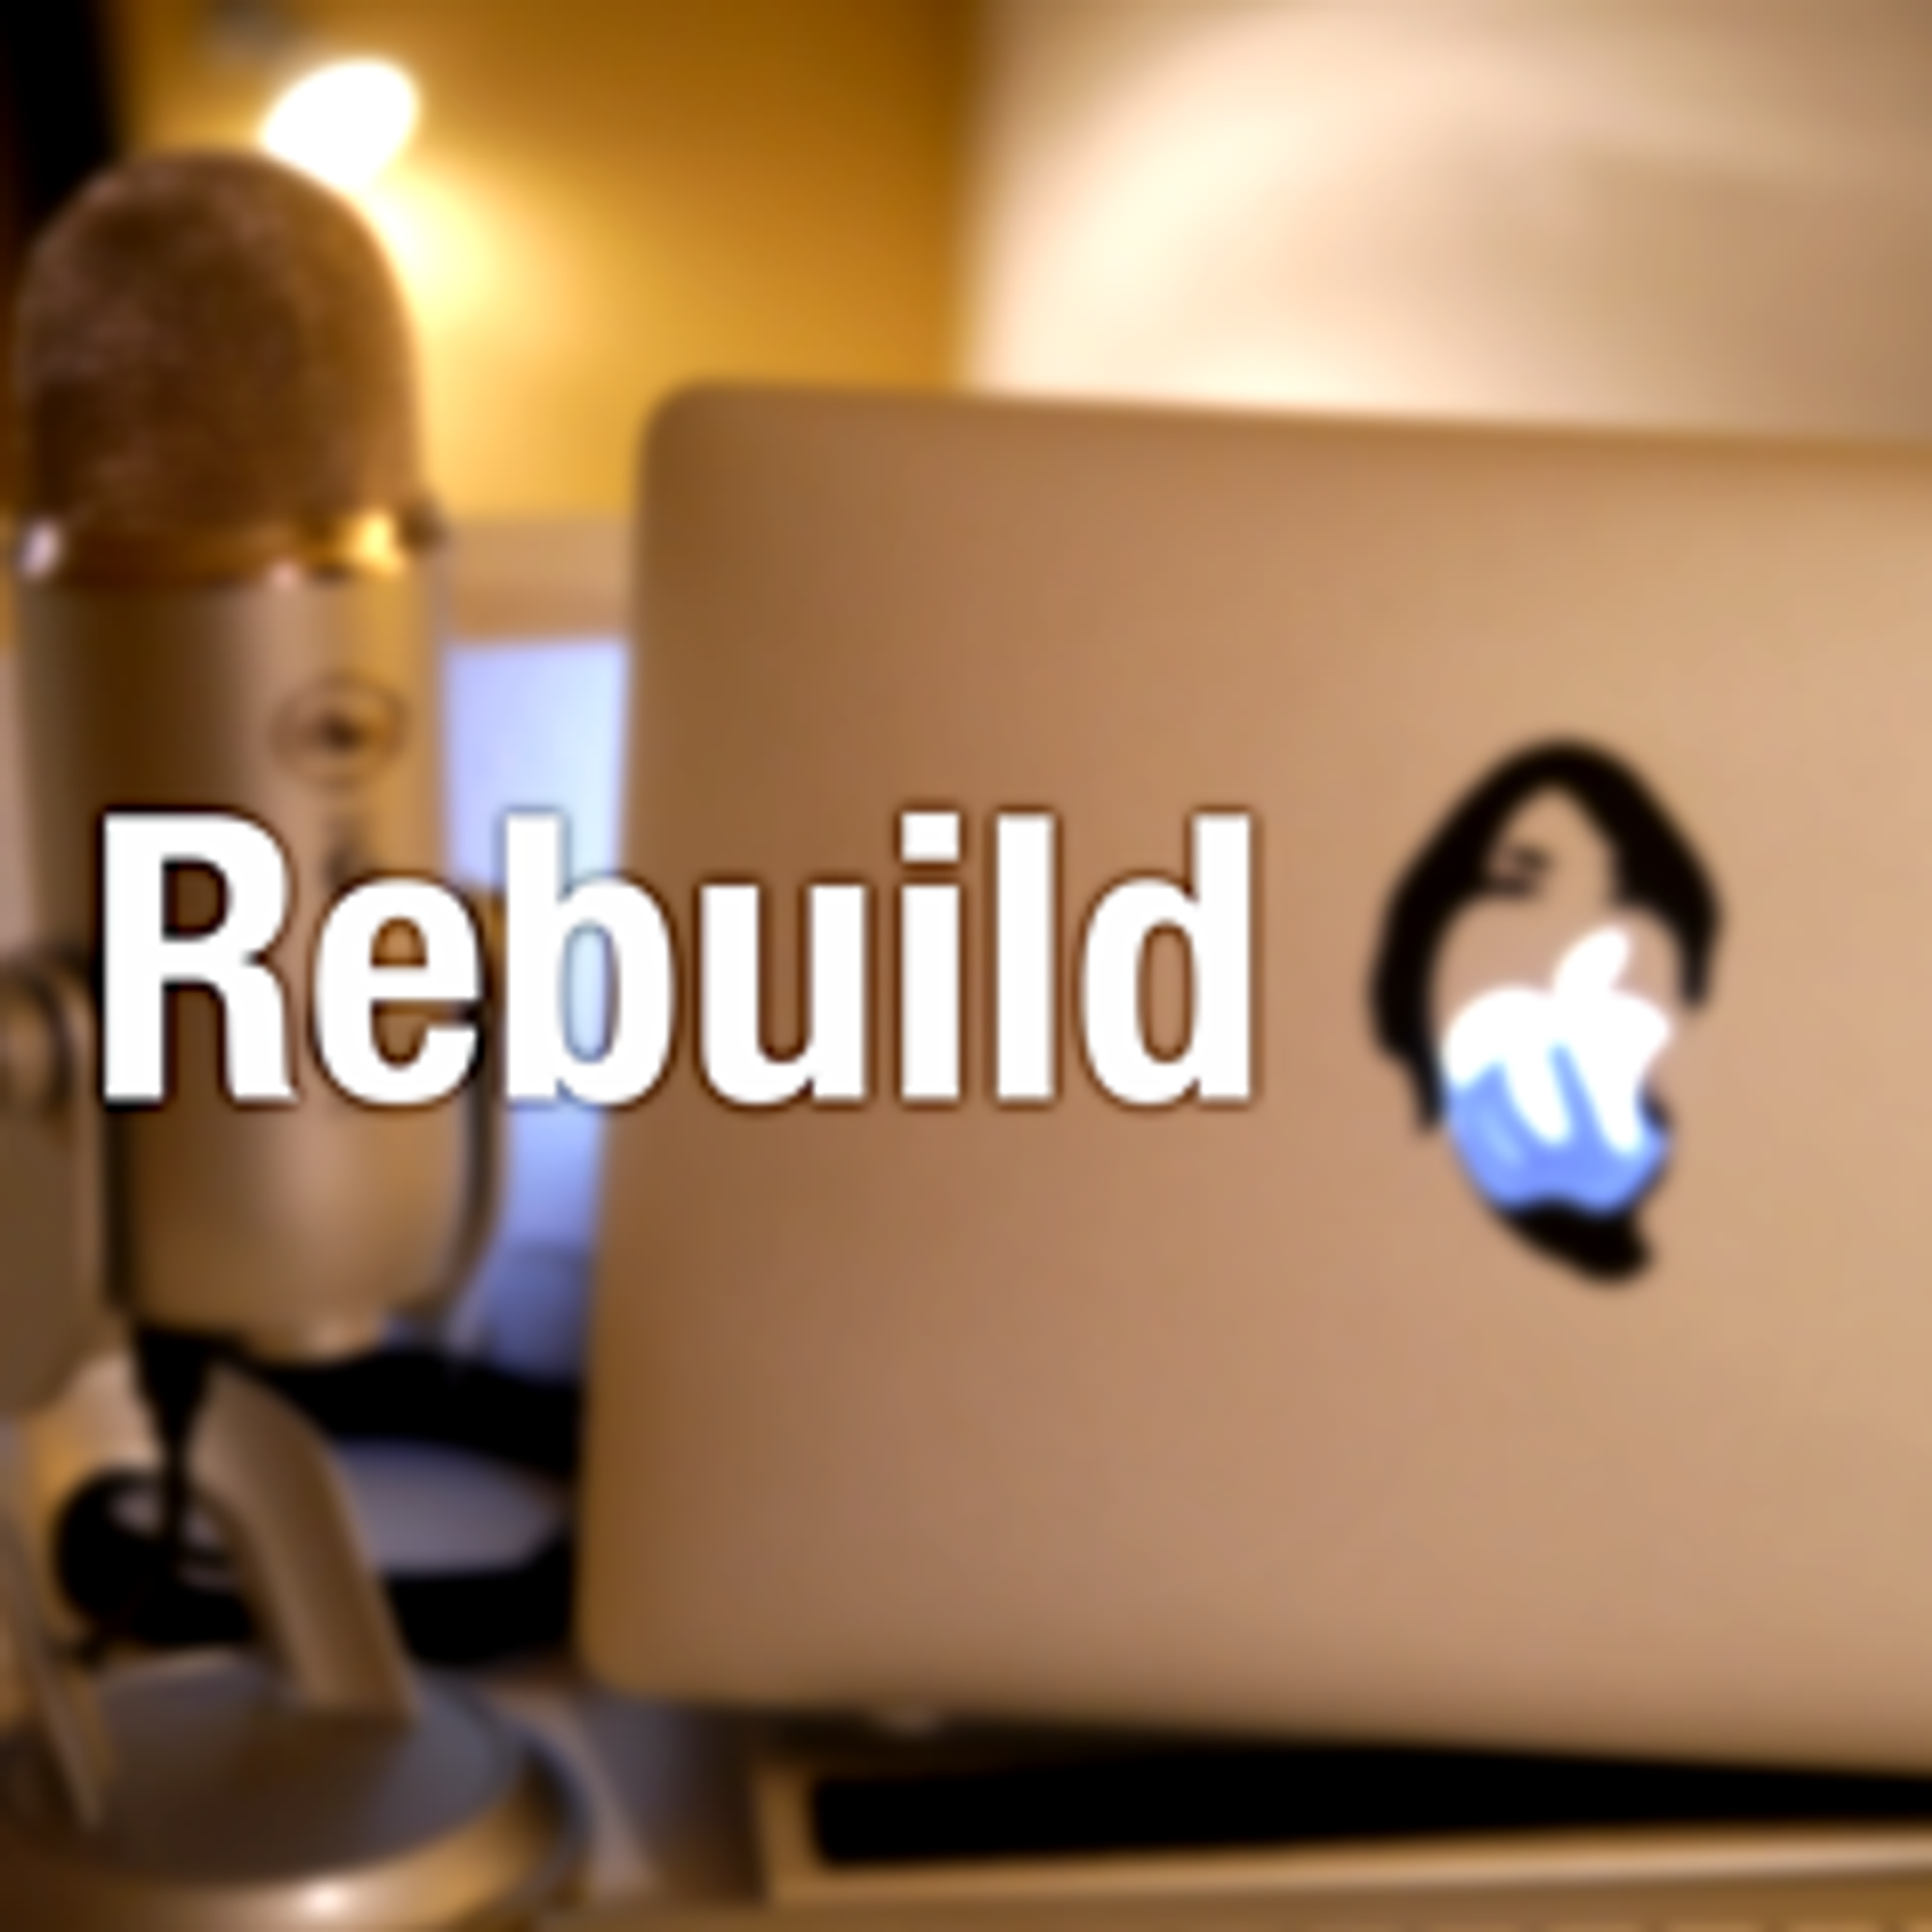 Rebuild: 330: I Can Catch My Runtime Exception (higepon)